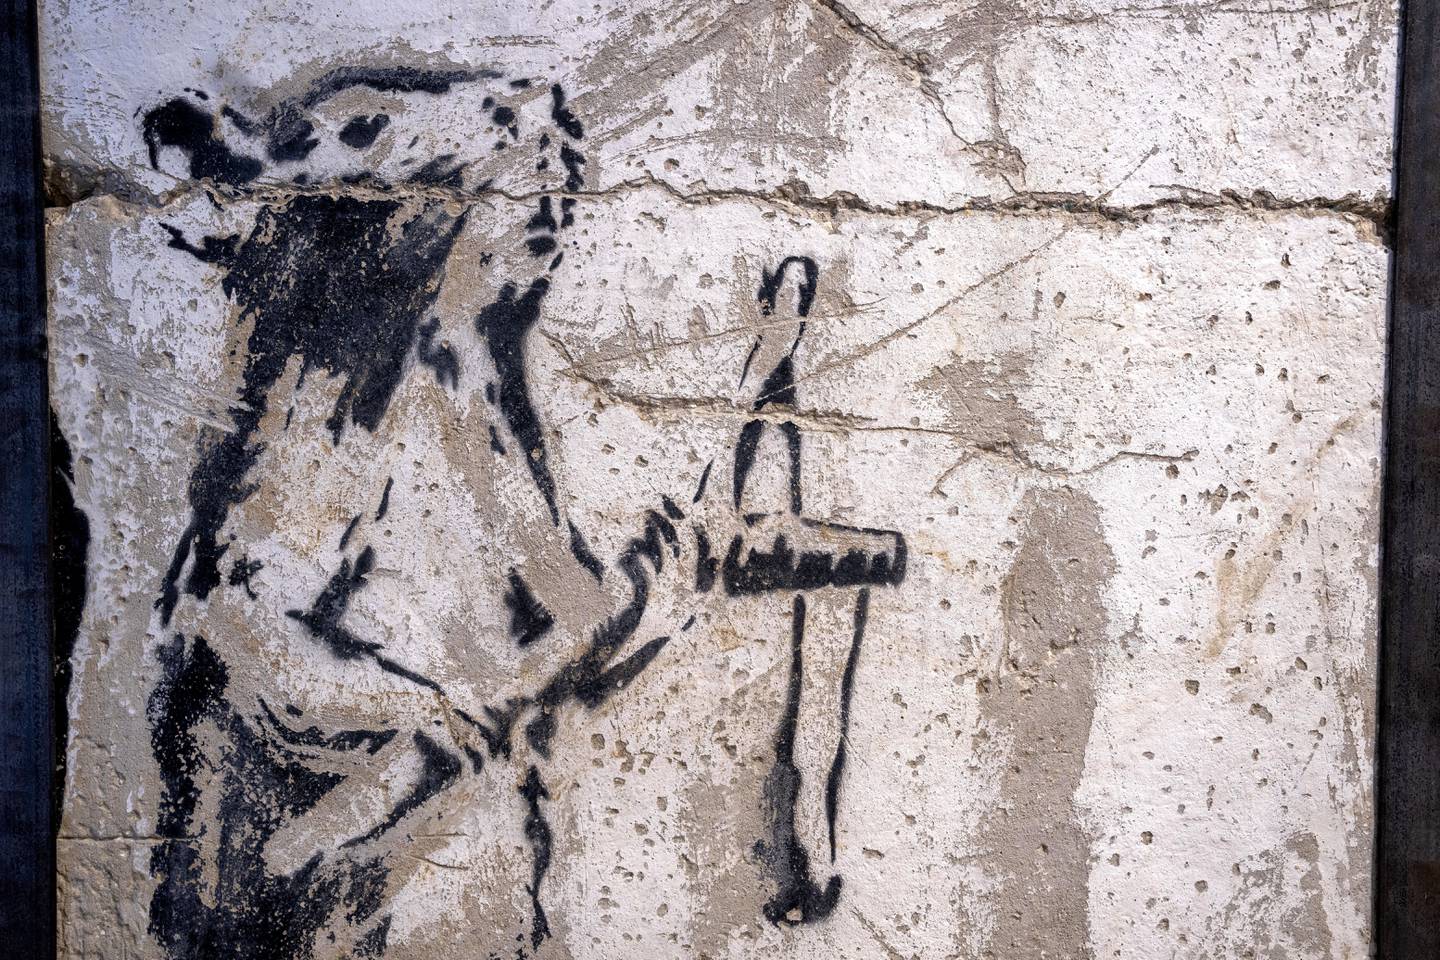 The painting of a rat in a sling once stood near Israel's separation barrier and is one of several works created in 2007. AP